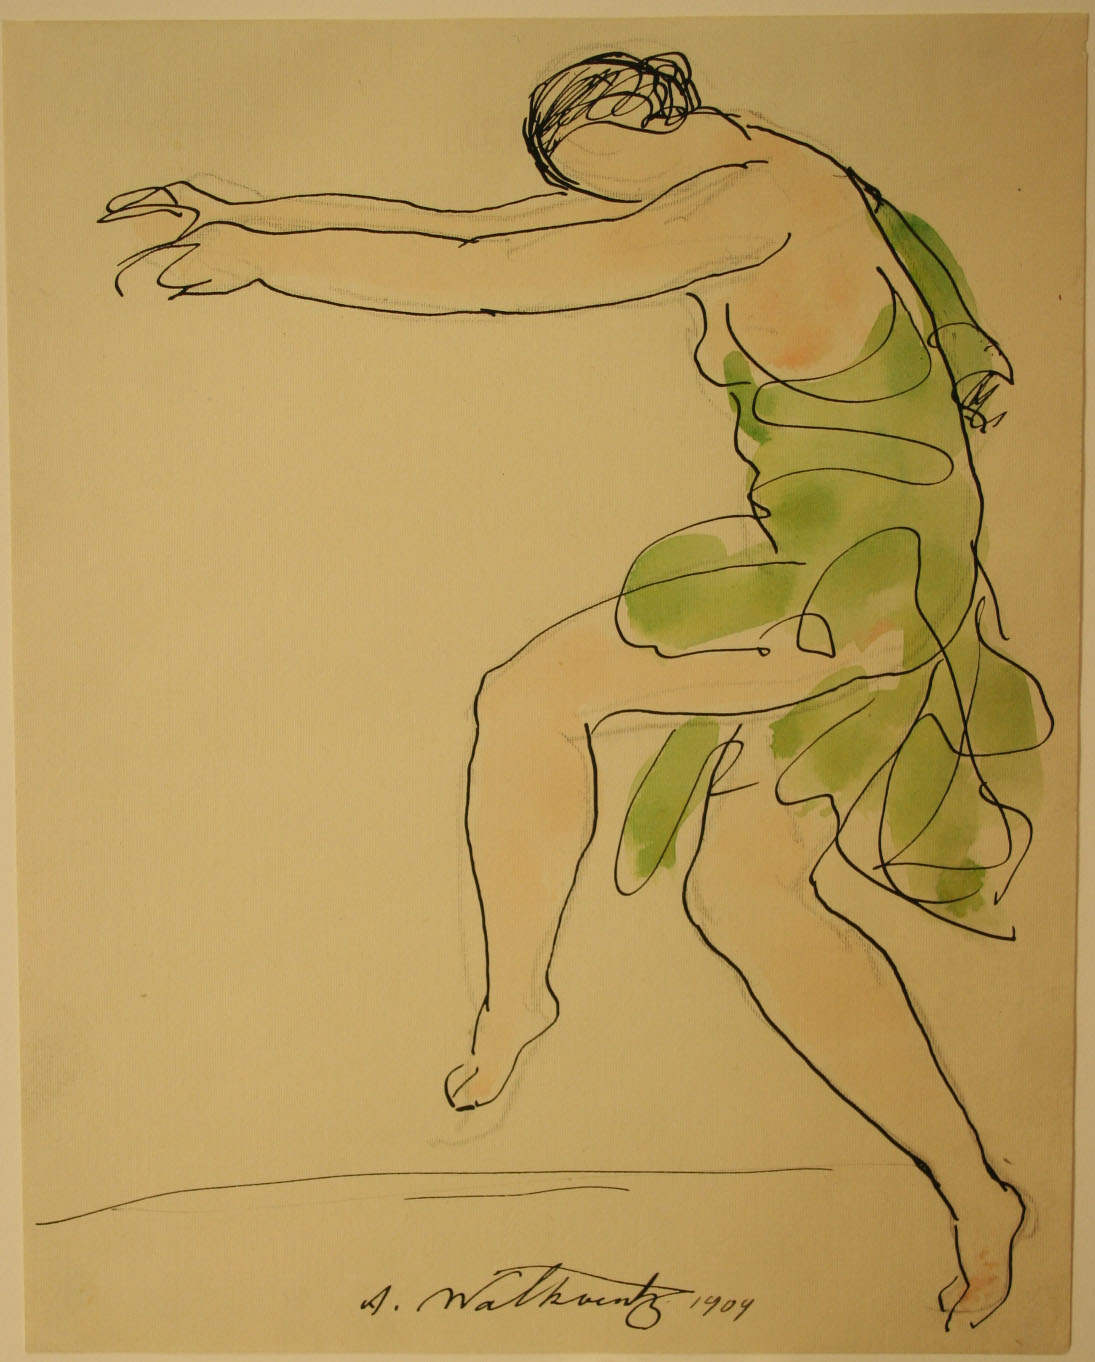 Abraham Walkowitz (American, 1878-1965), [<i>Isadora Duncan Study 01</i>], 20th c., ink, watercolor, graphite. Museums Collections, Gift of Ms. Virginia Zabriskie